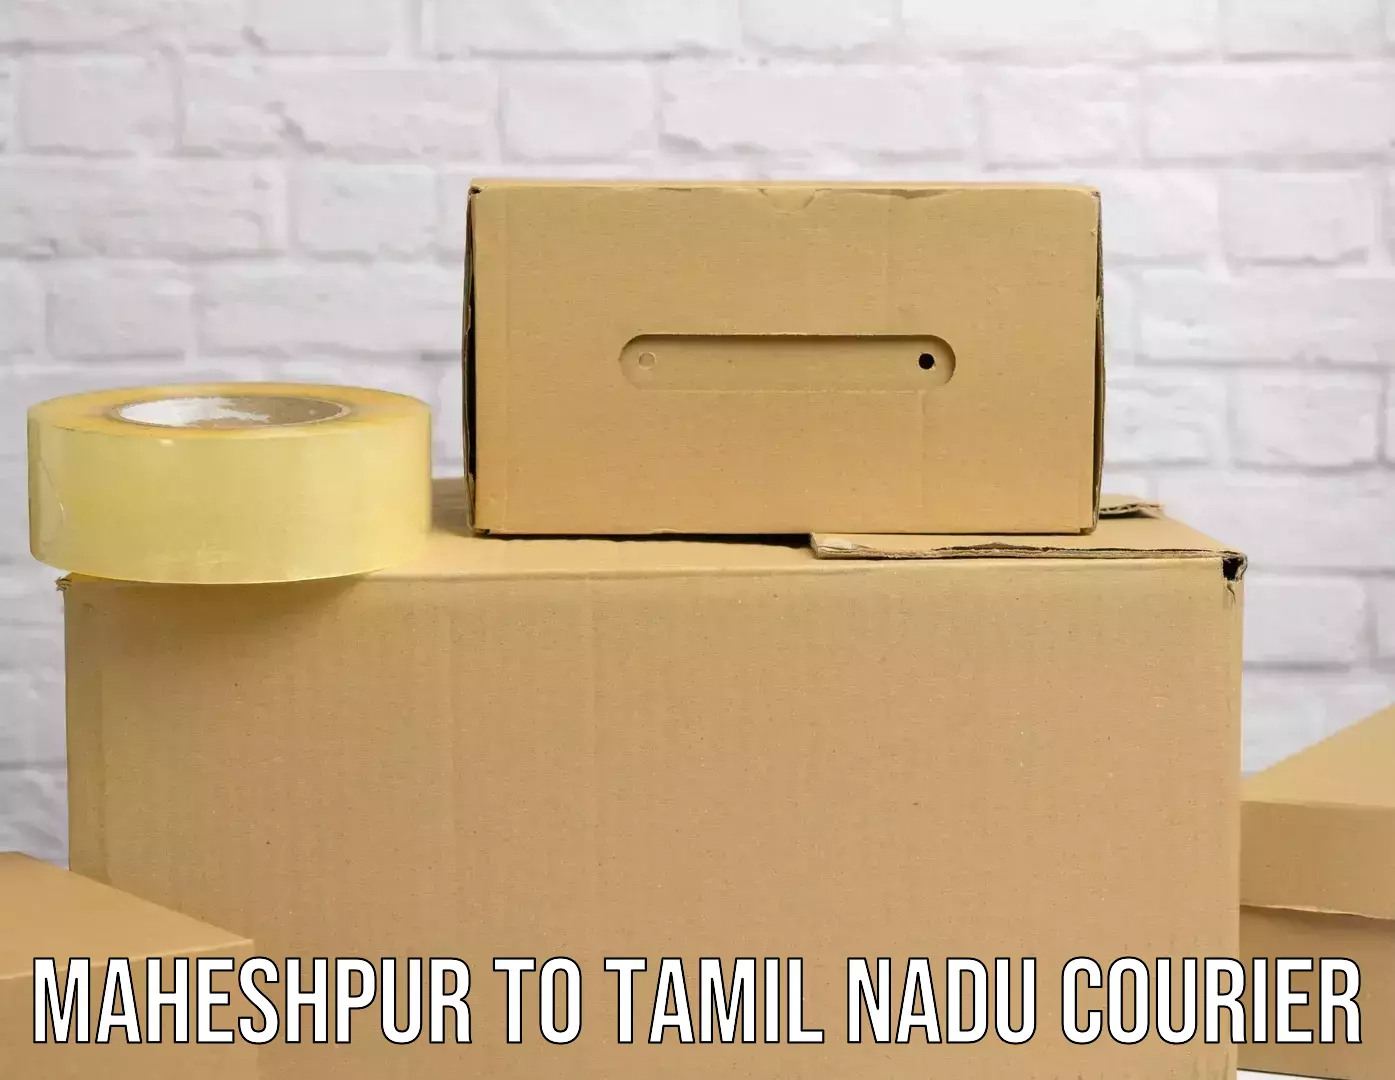 Courier service booking Maheshpur to Tiruppur